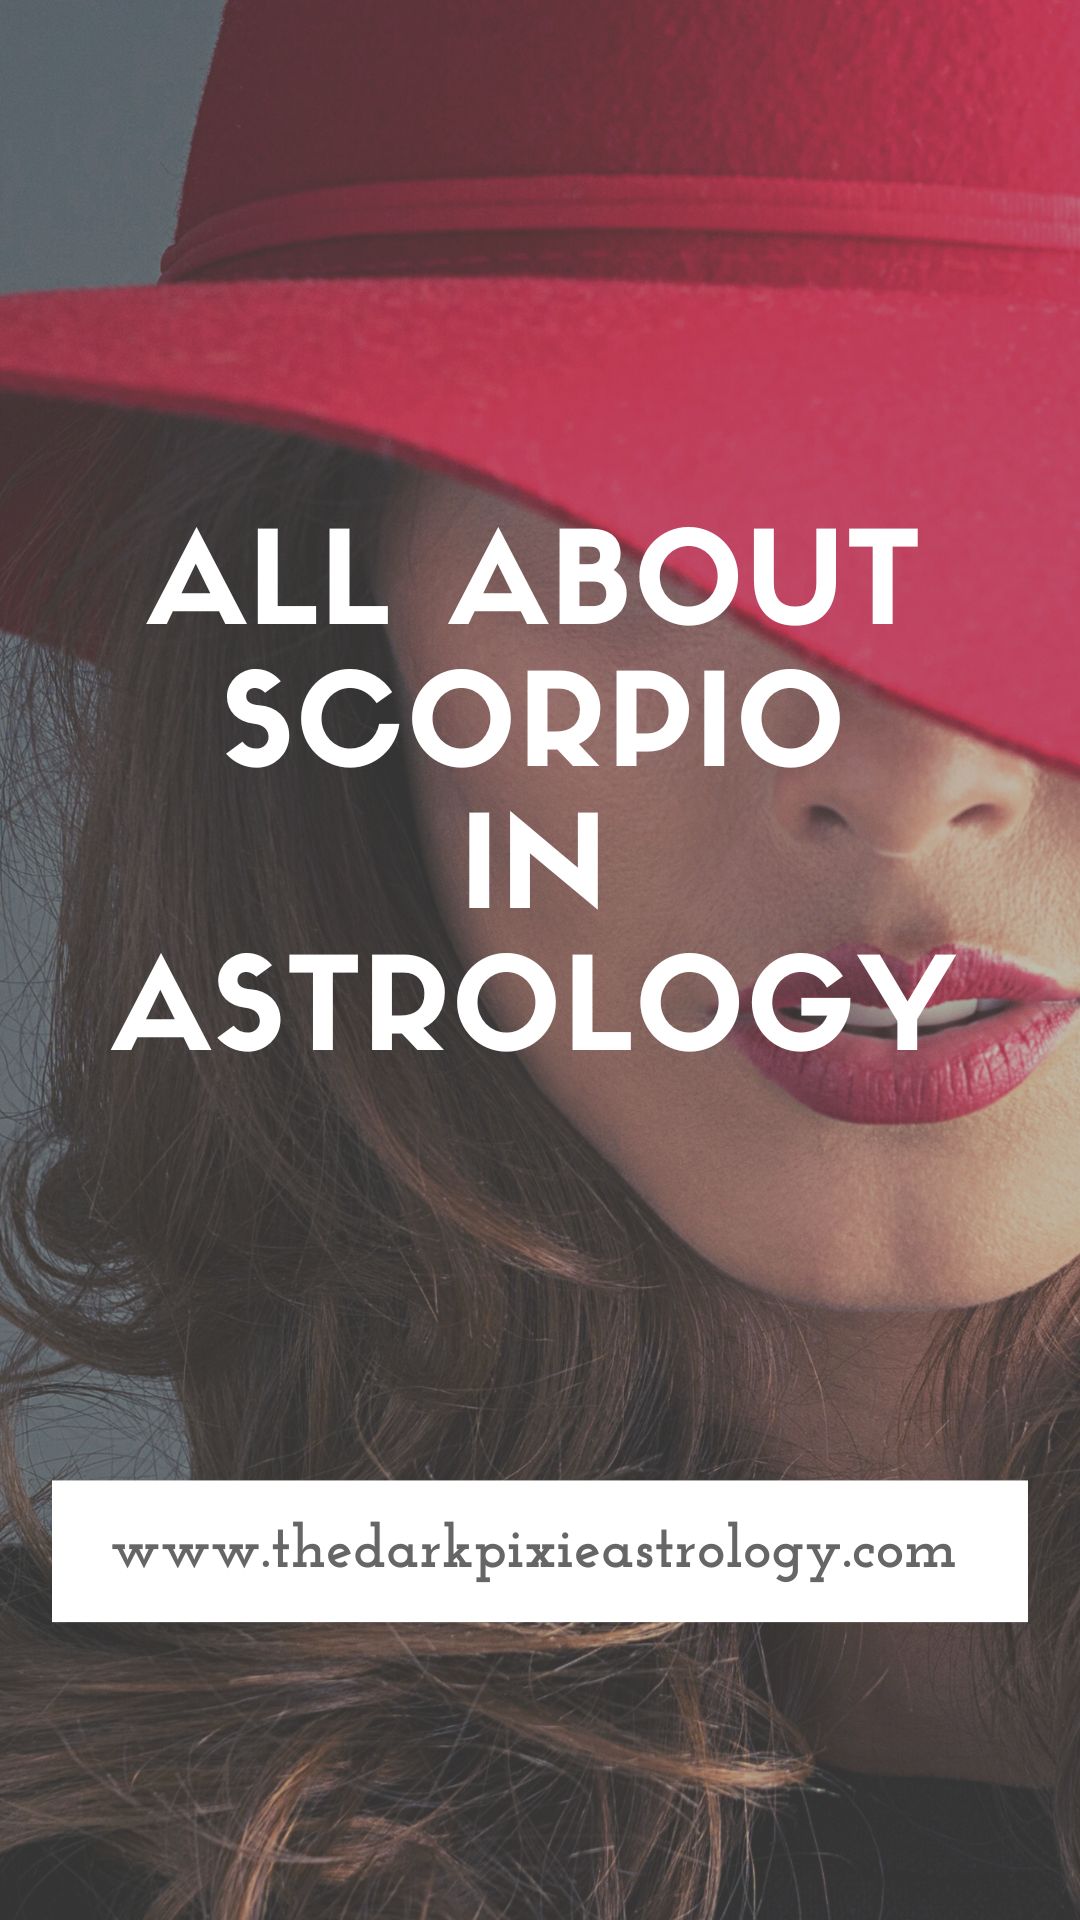 All About Scorpio in Astrology - The Dark Pixie Astrology